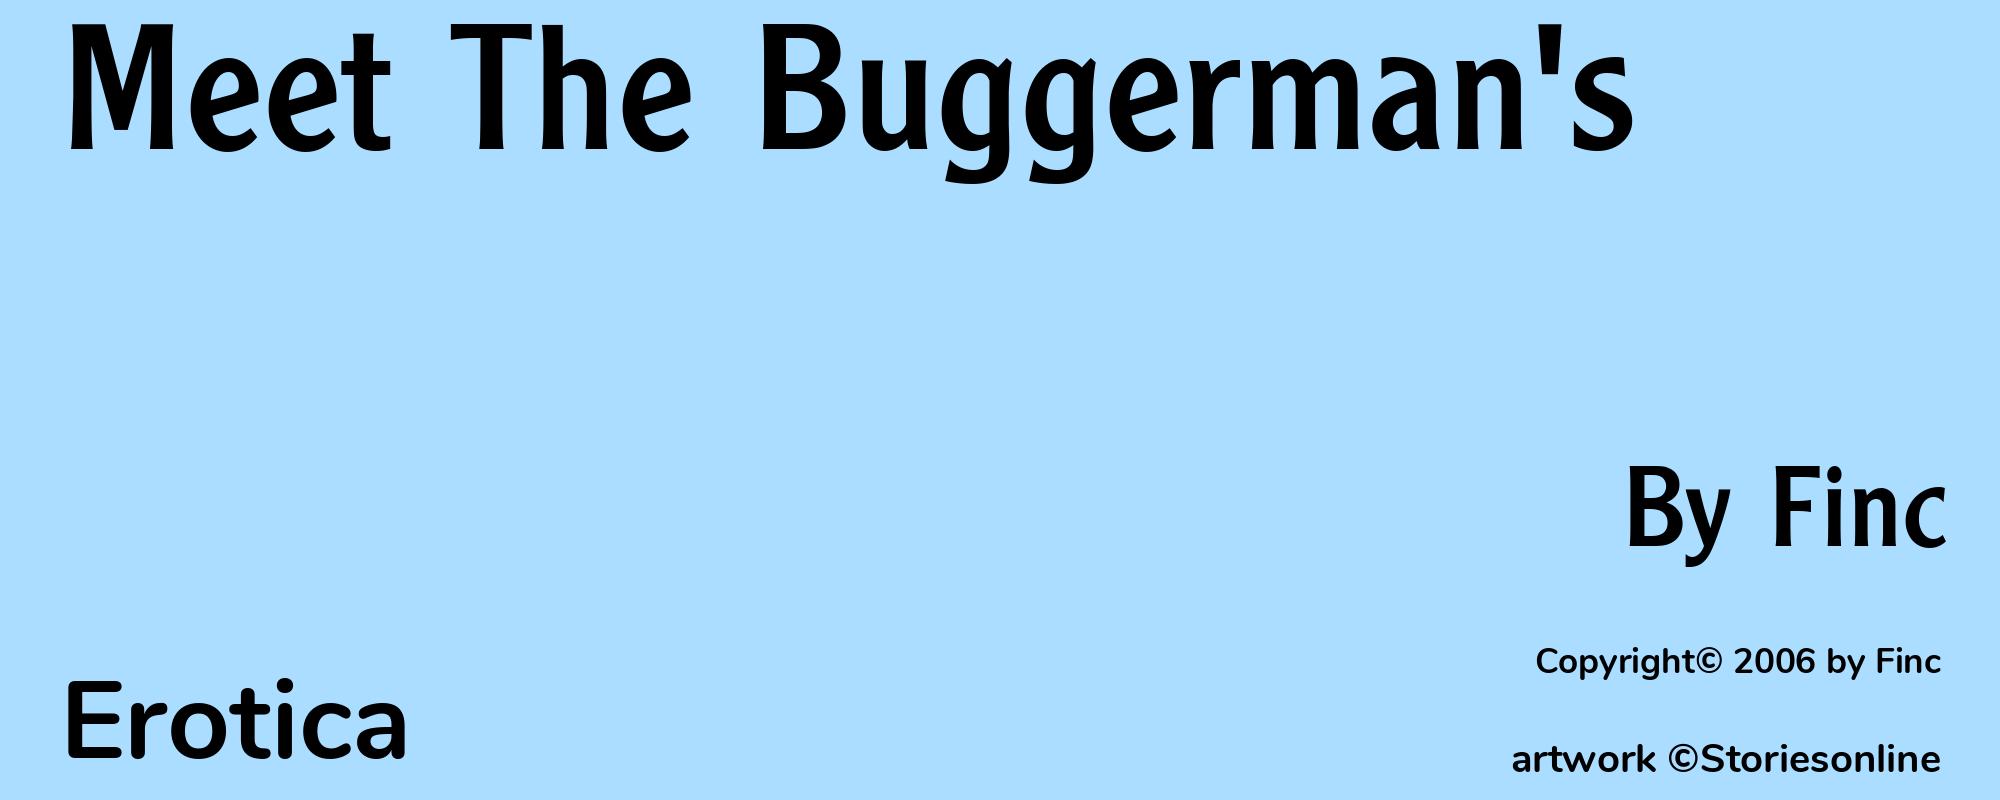 Meet The Buggerman's - Cover